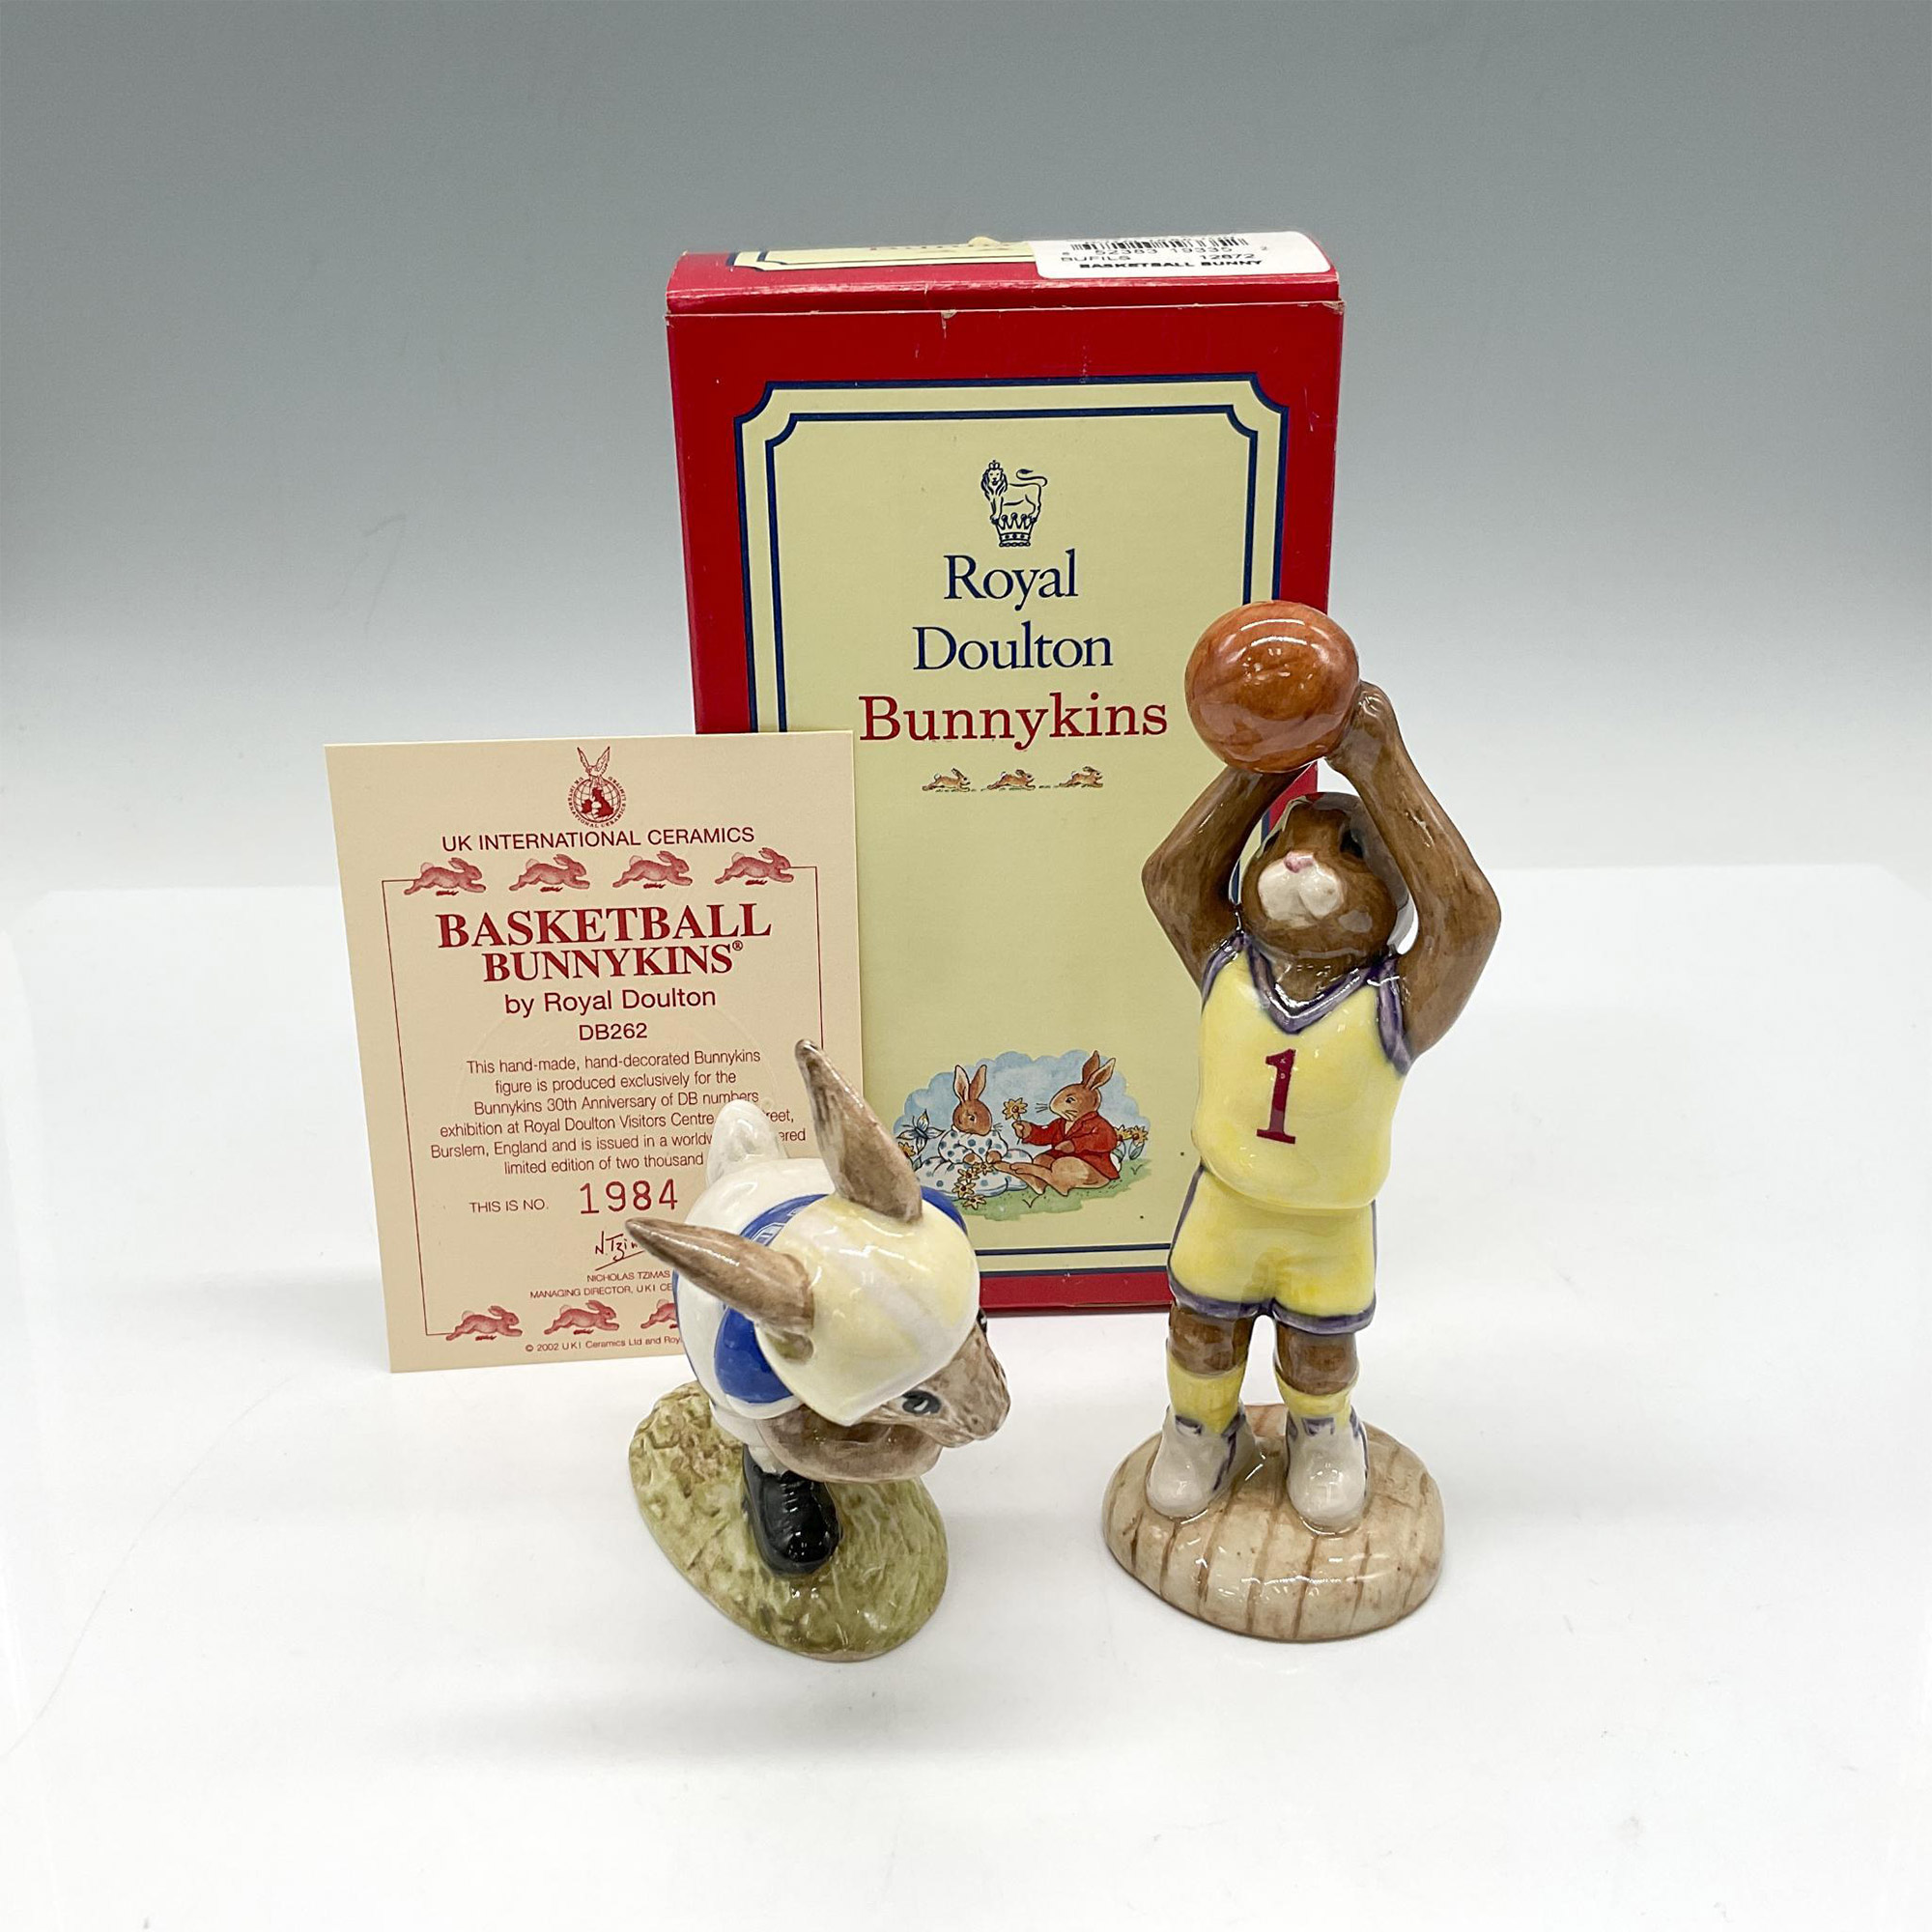 2pc Royal Doulton Bunnykins Figurines, Sports Figurines DB29A + 262 - Image 4 of 4